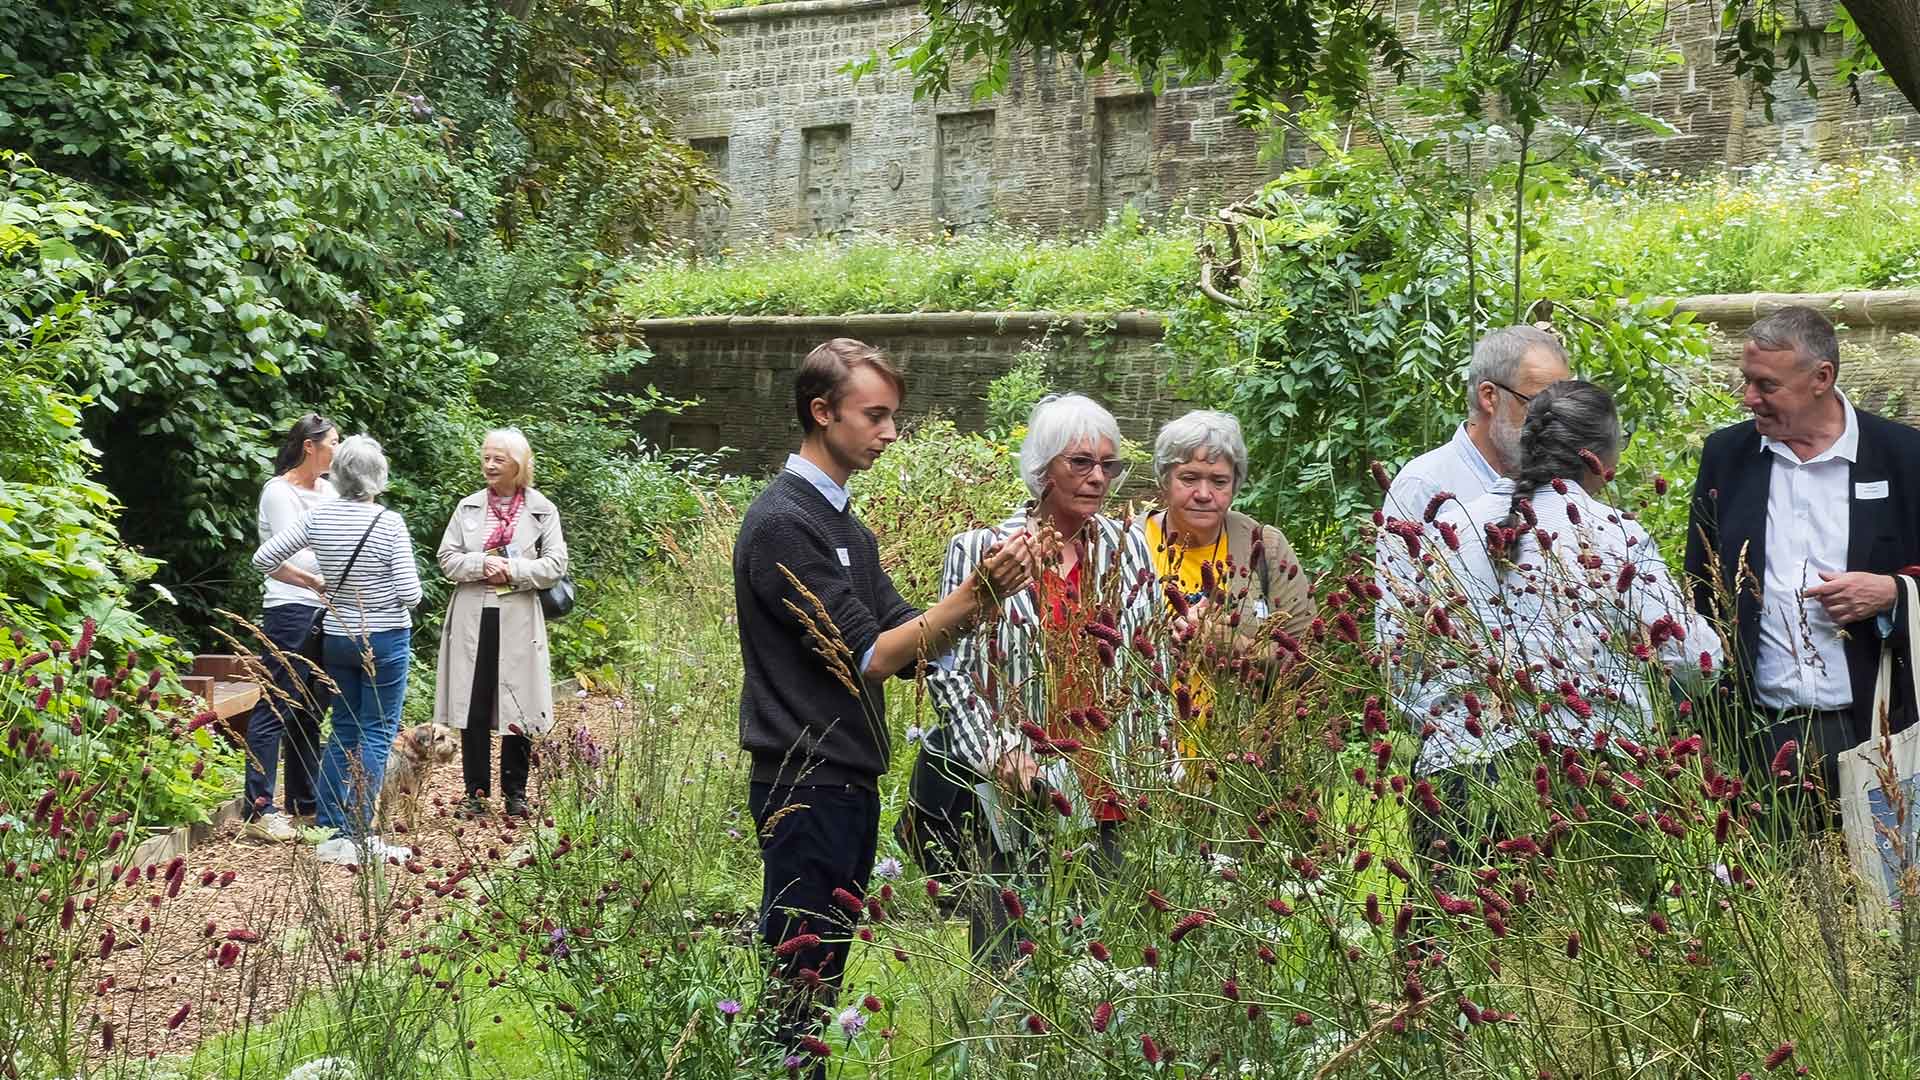 Psalm 27 Garden hailed ‘an amazing miracle’